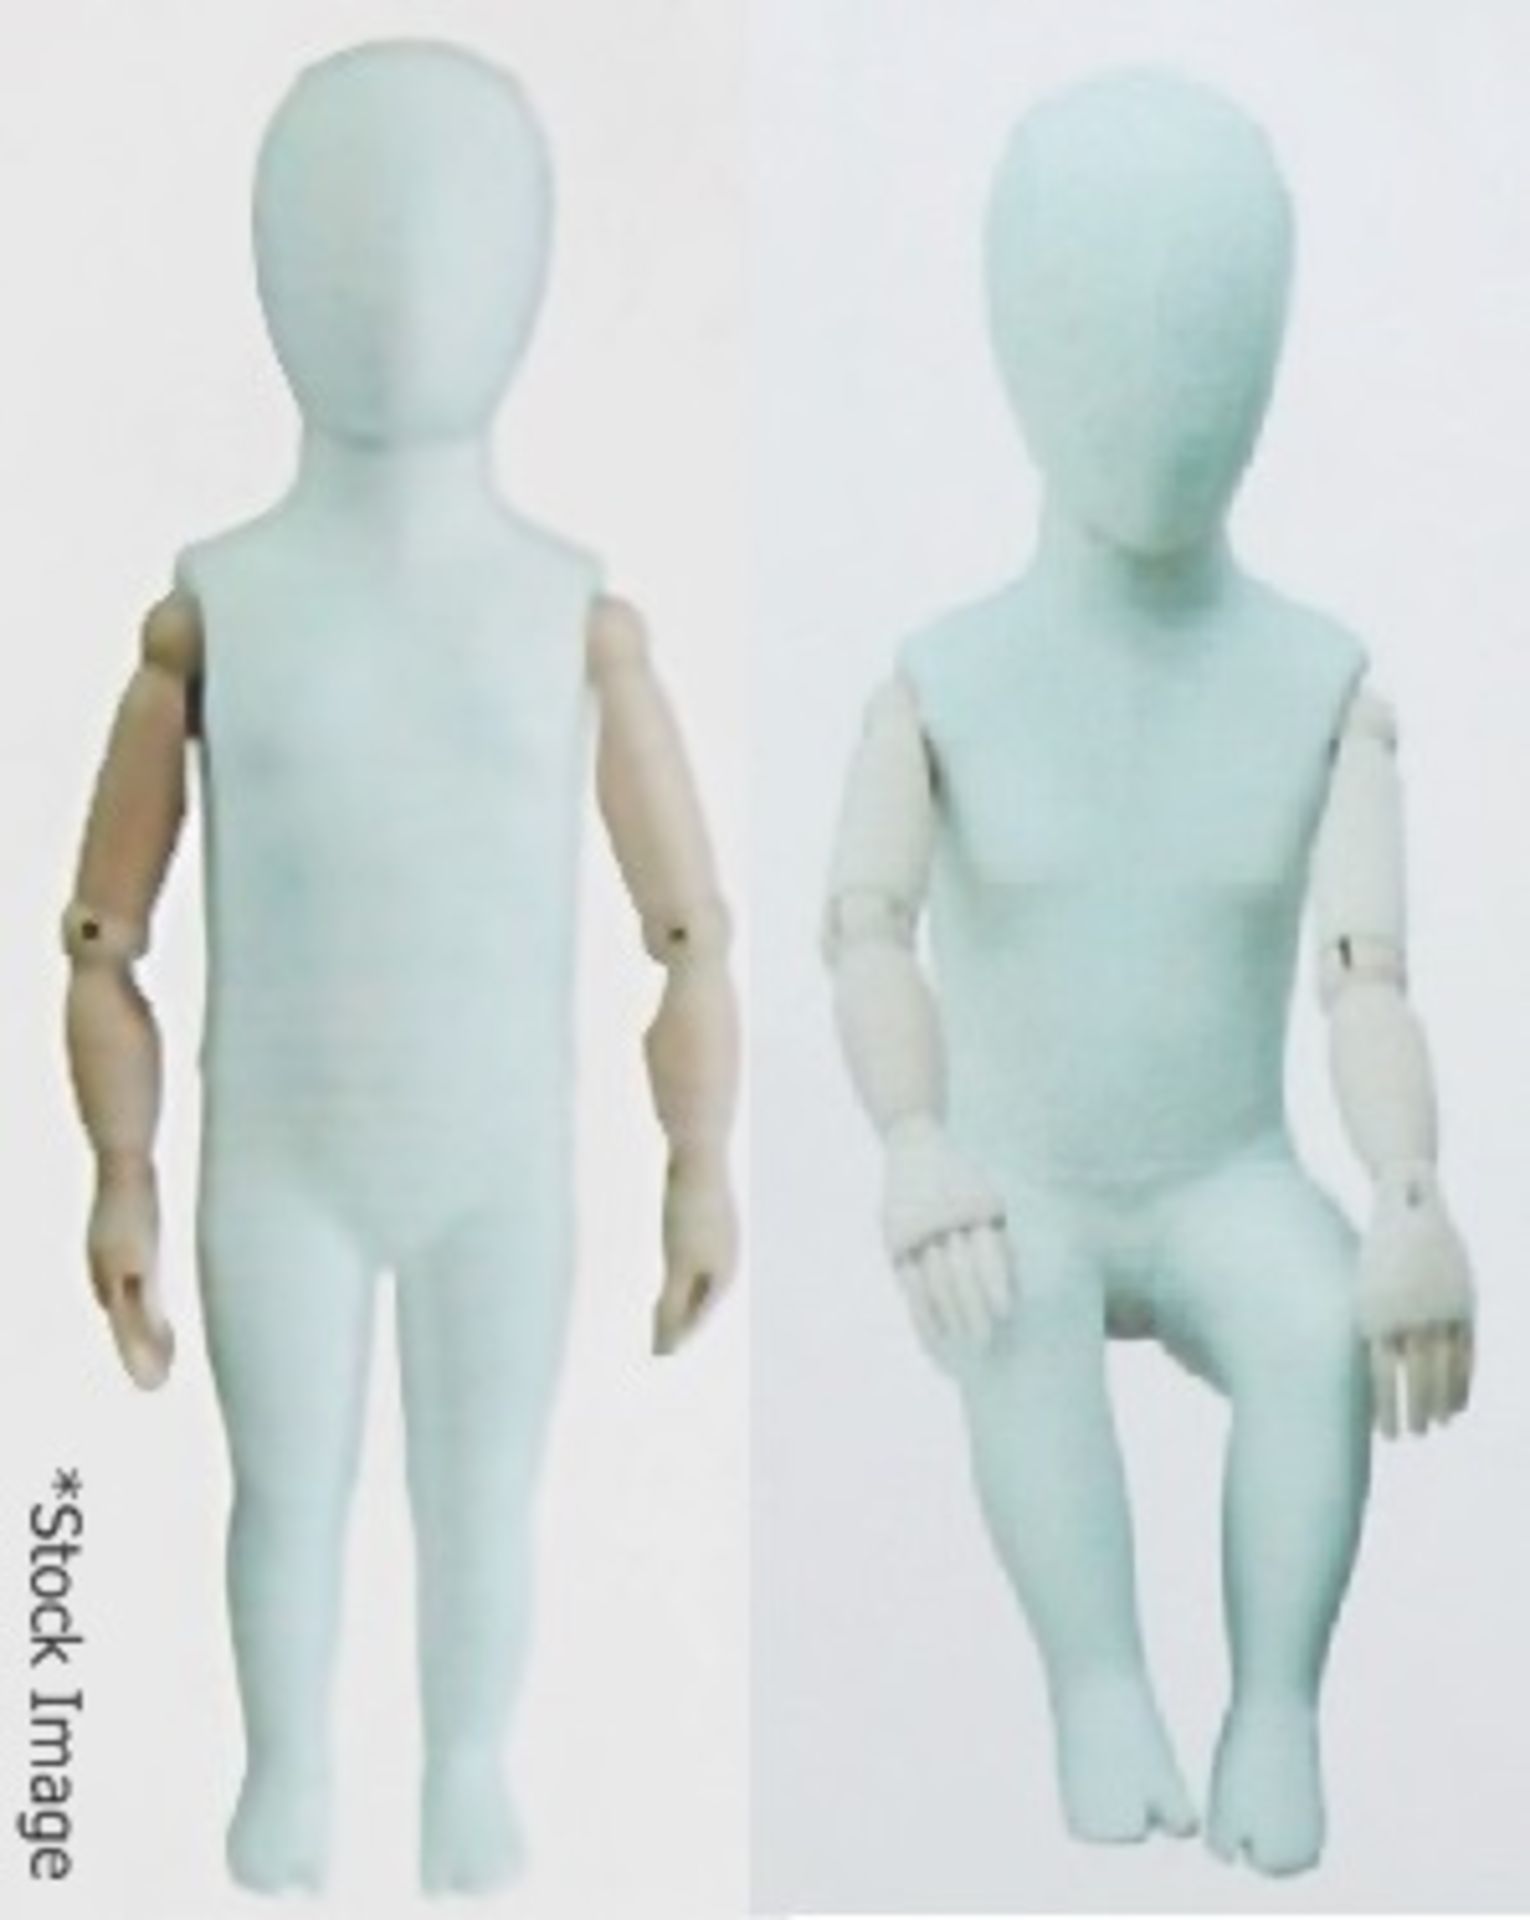 5 x Assorted ATREZZO Commercial High-grade BABY Shop Mannequin Dummies With Posable Wooden Arms -